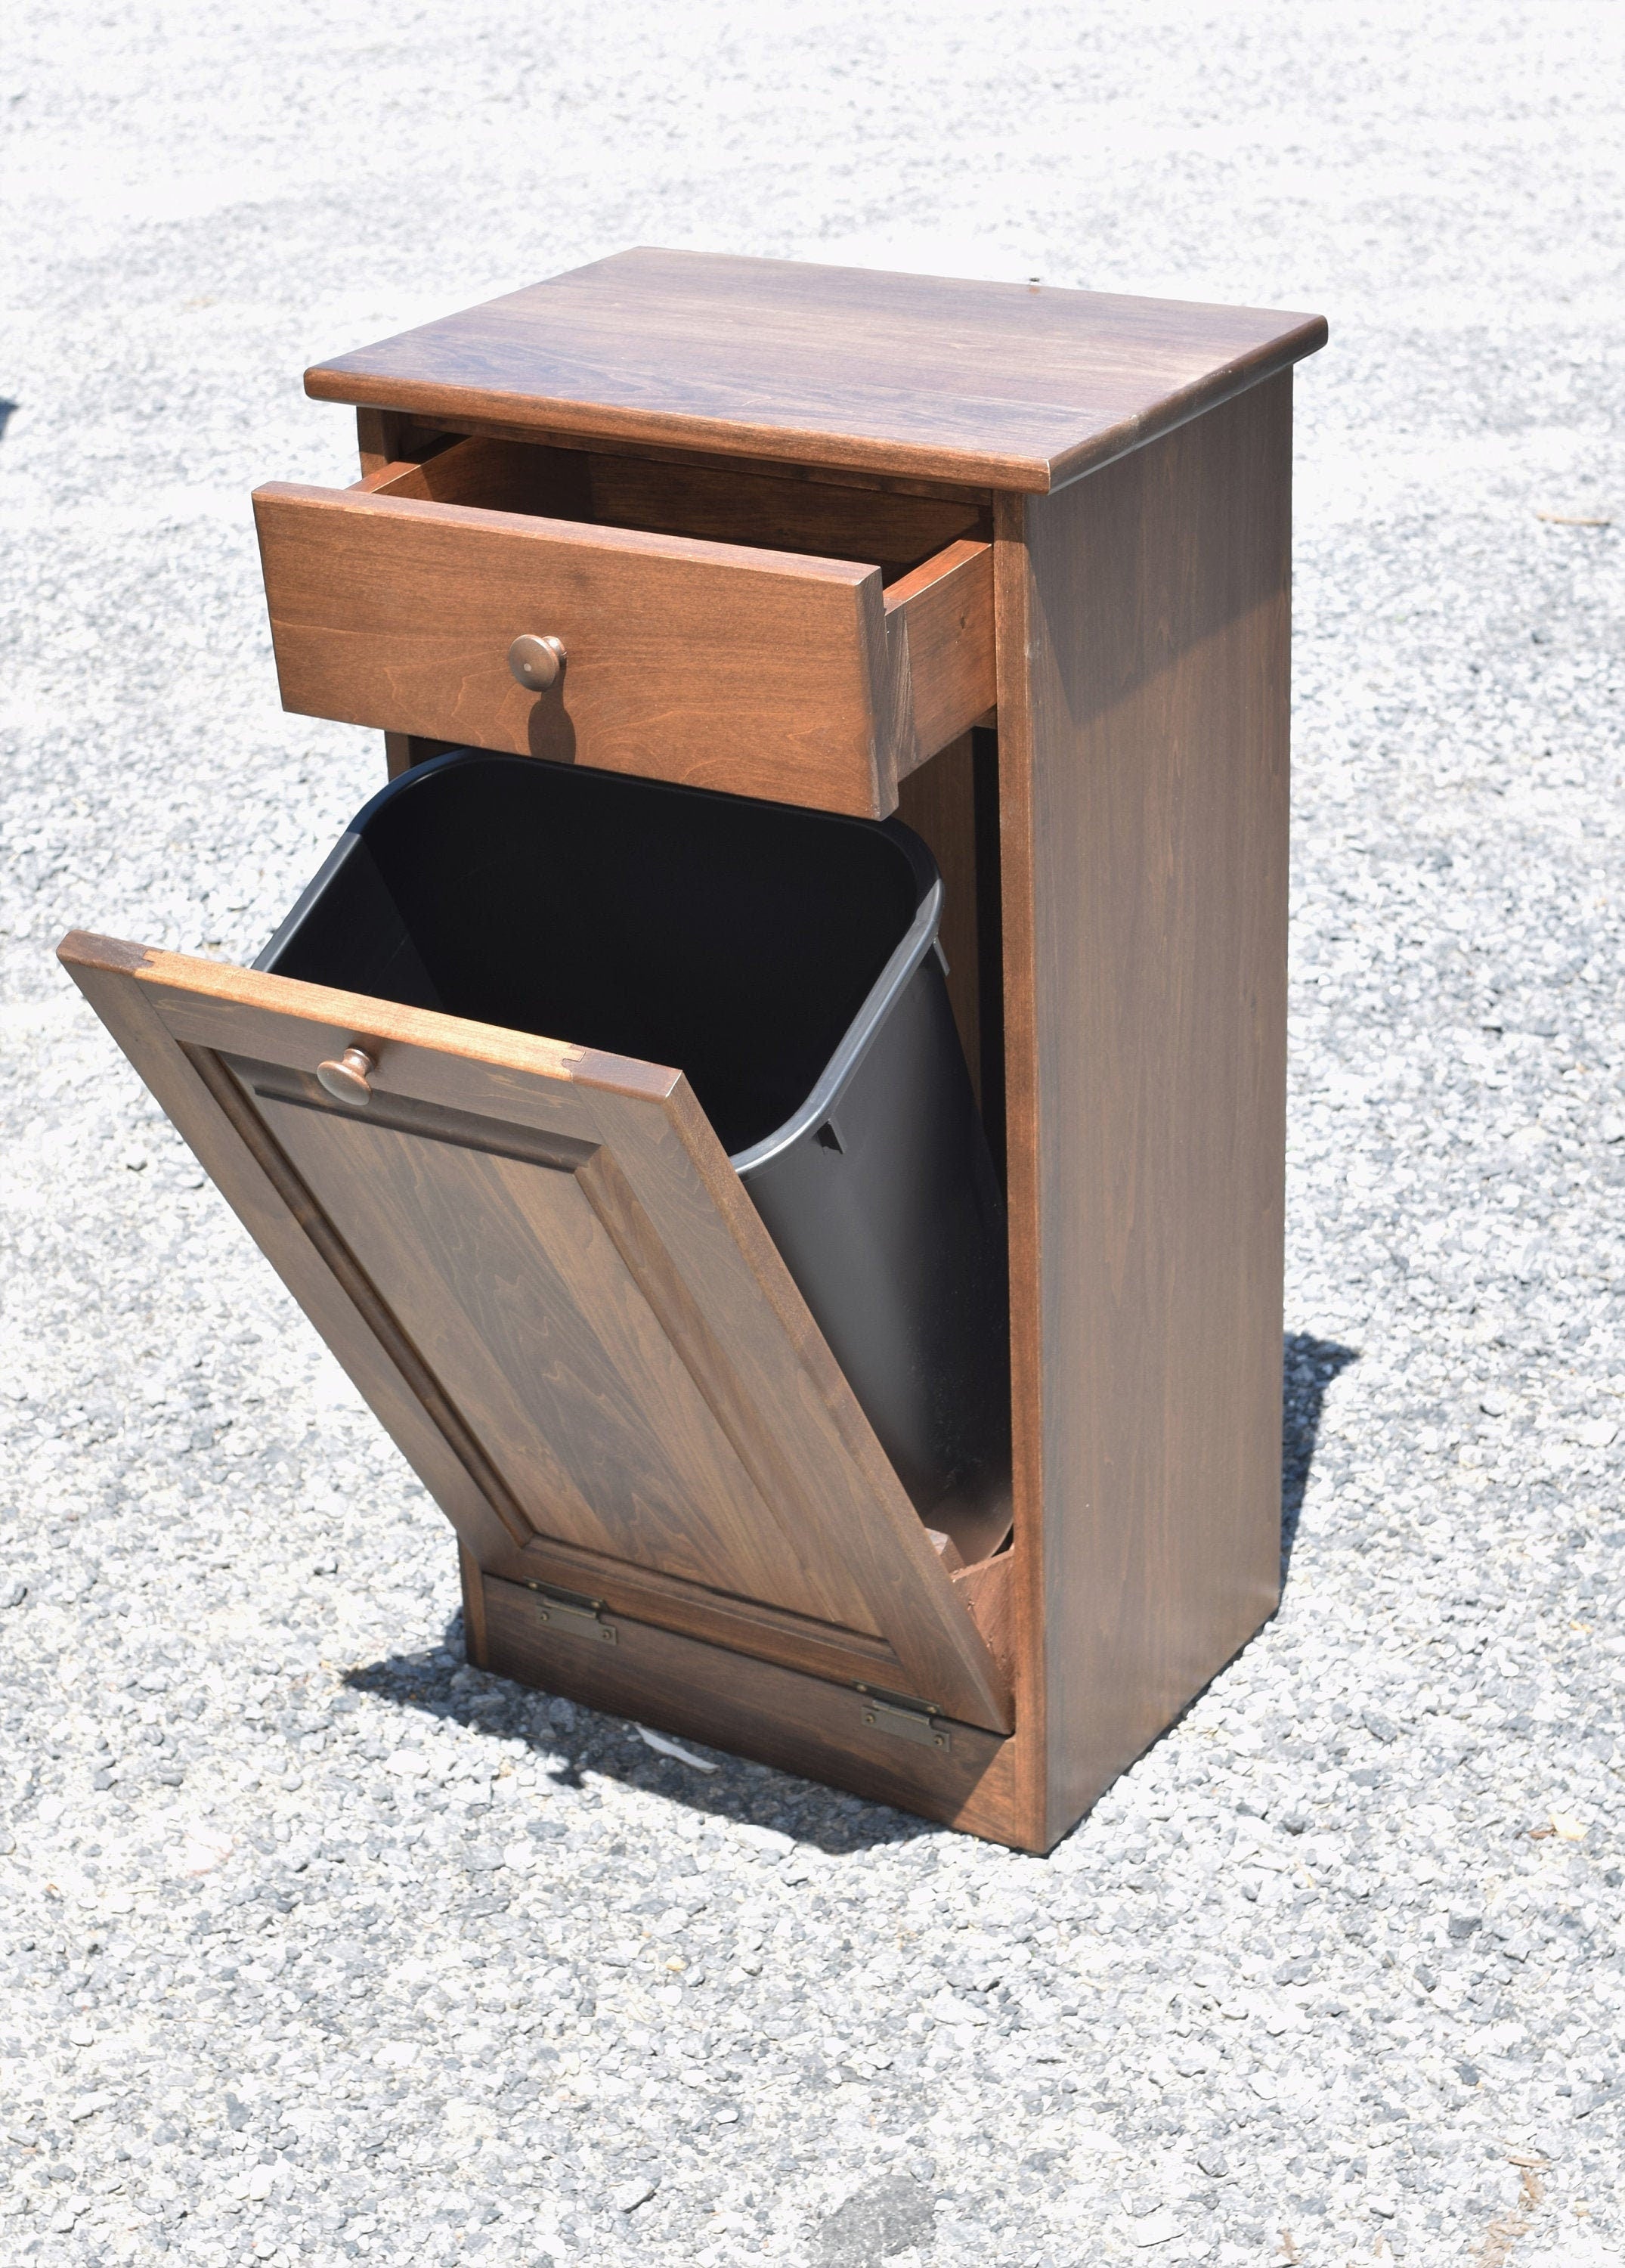 Extra Large Wood Trash Bin Unfinished Trash Can Trash Cabinet With Trim  Amish Handmade Made in USA 50 Qt 